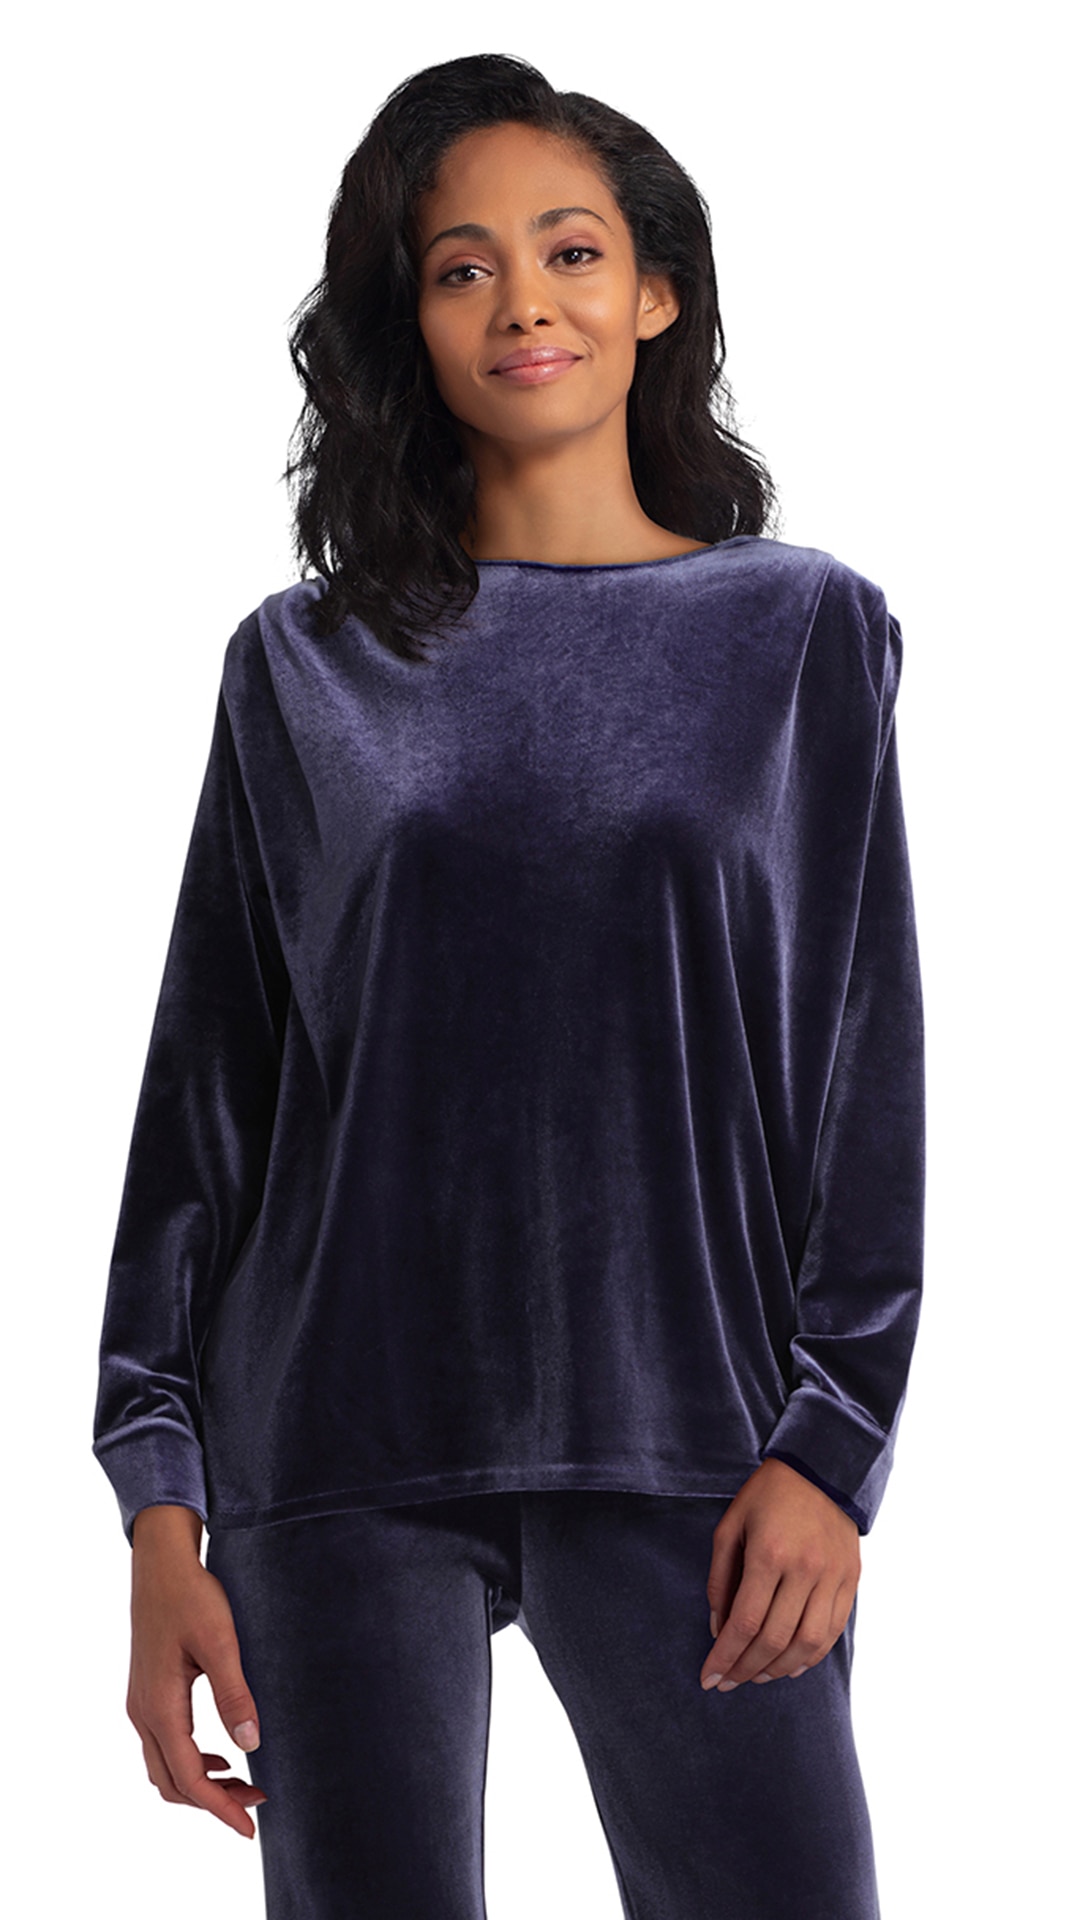 Clothing & Shoes - Tops - T-Shirts & Tops - H Halston Long Sleeve